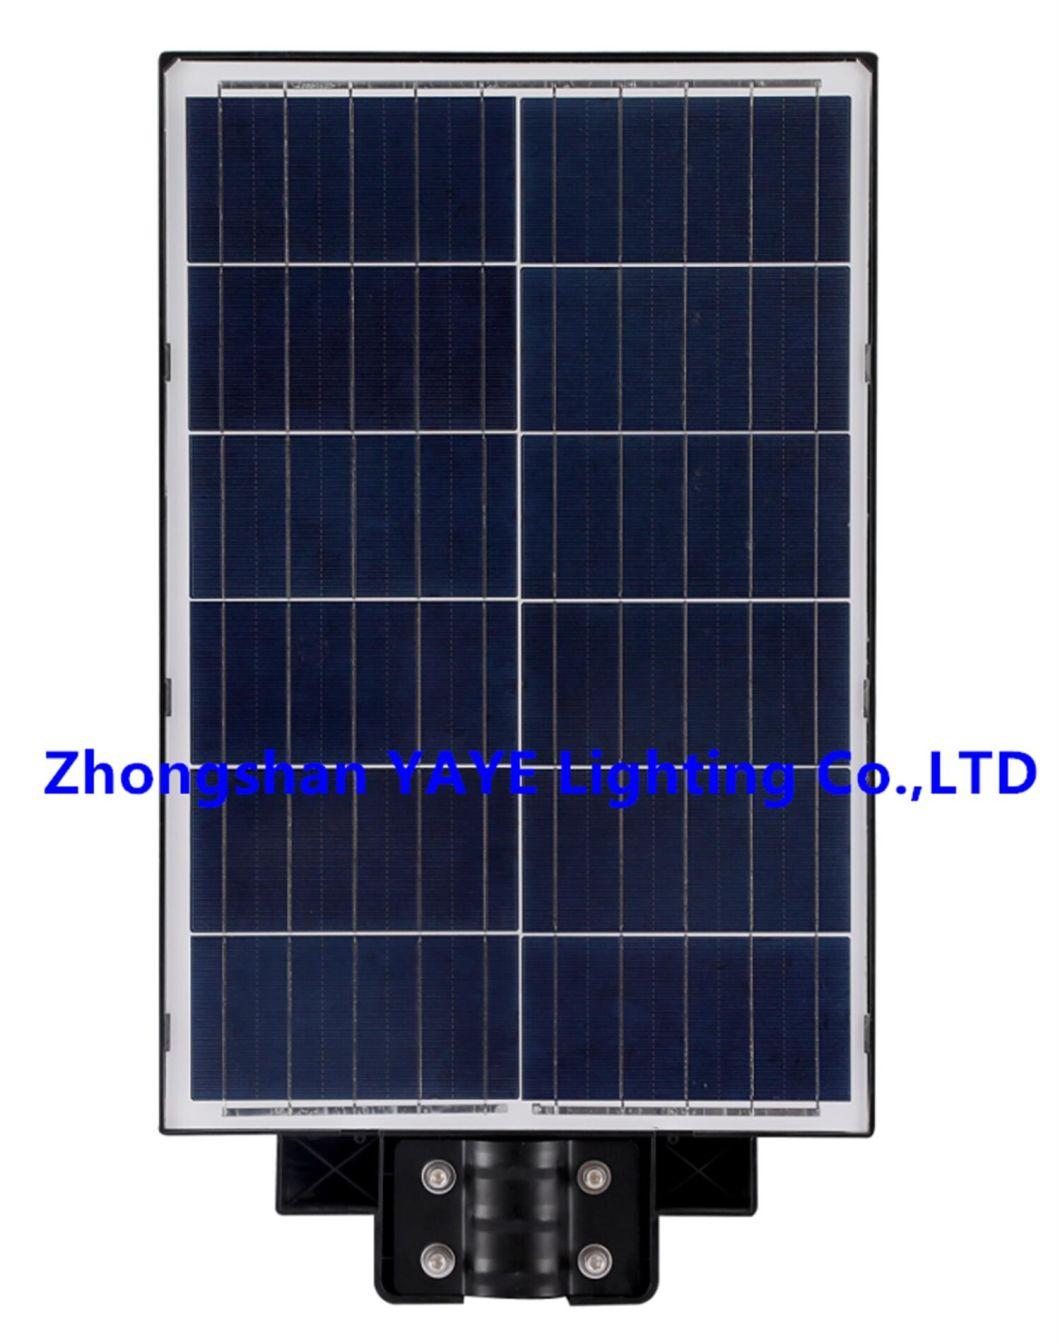 Yaye Hottest Sell 300W Outdoor IP67 LED Solar Street Light with Remote Controller/Radar Motion Sensor/ 2 Years Warranty/1000PCS Stock